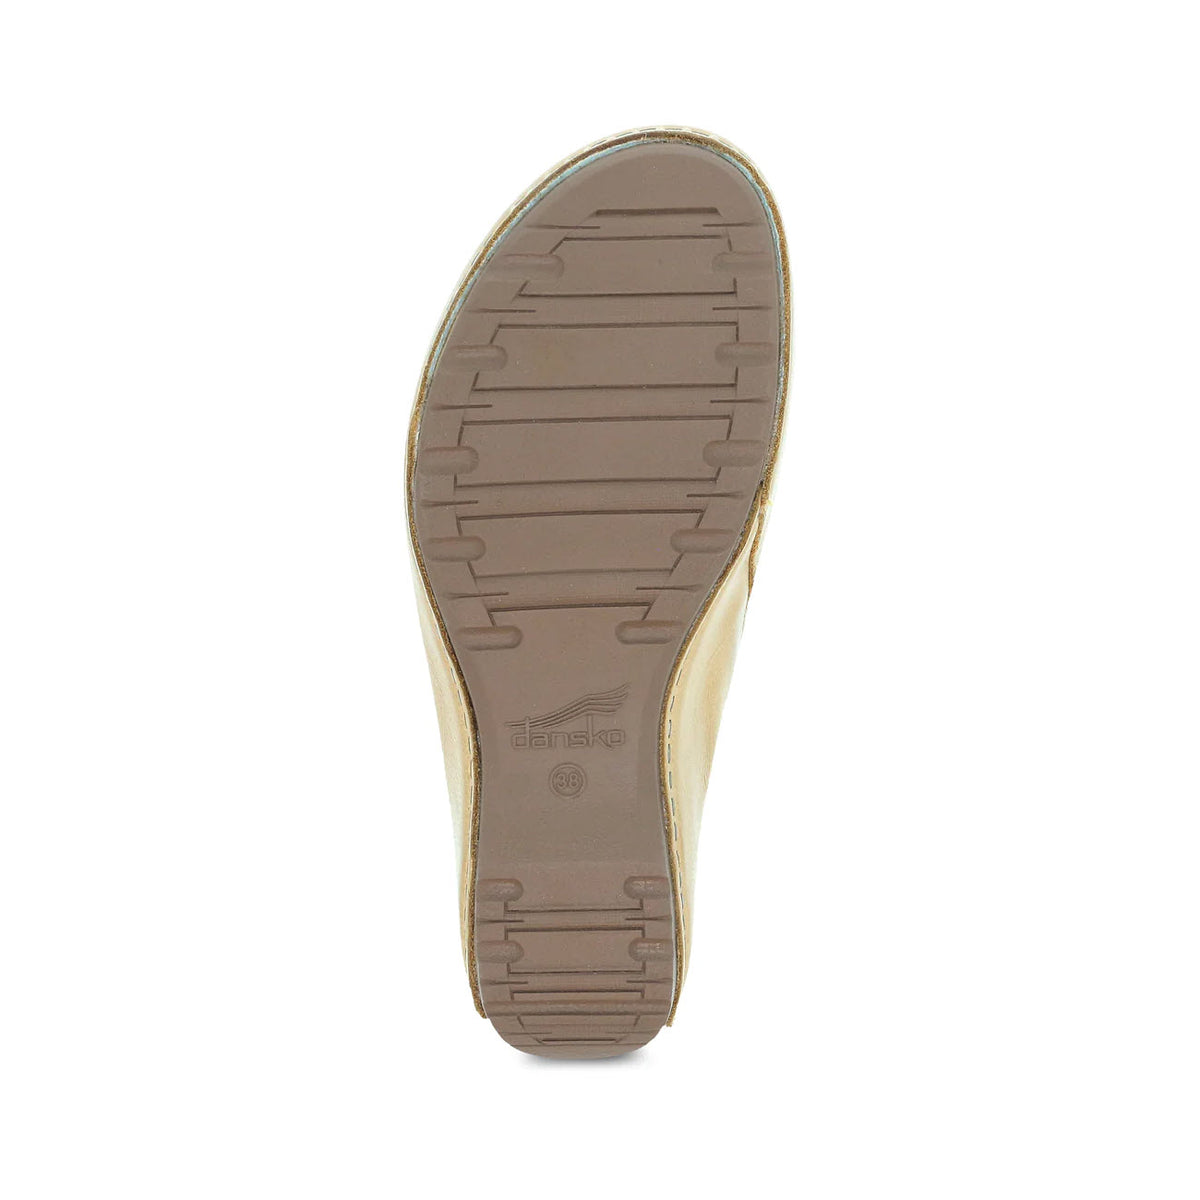 Sole of a DANSKO TALULAH TAN - WOMENS mule displayed against a white background, showing a flat tread pattern and brand imprint.